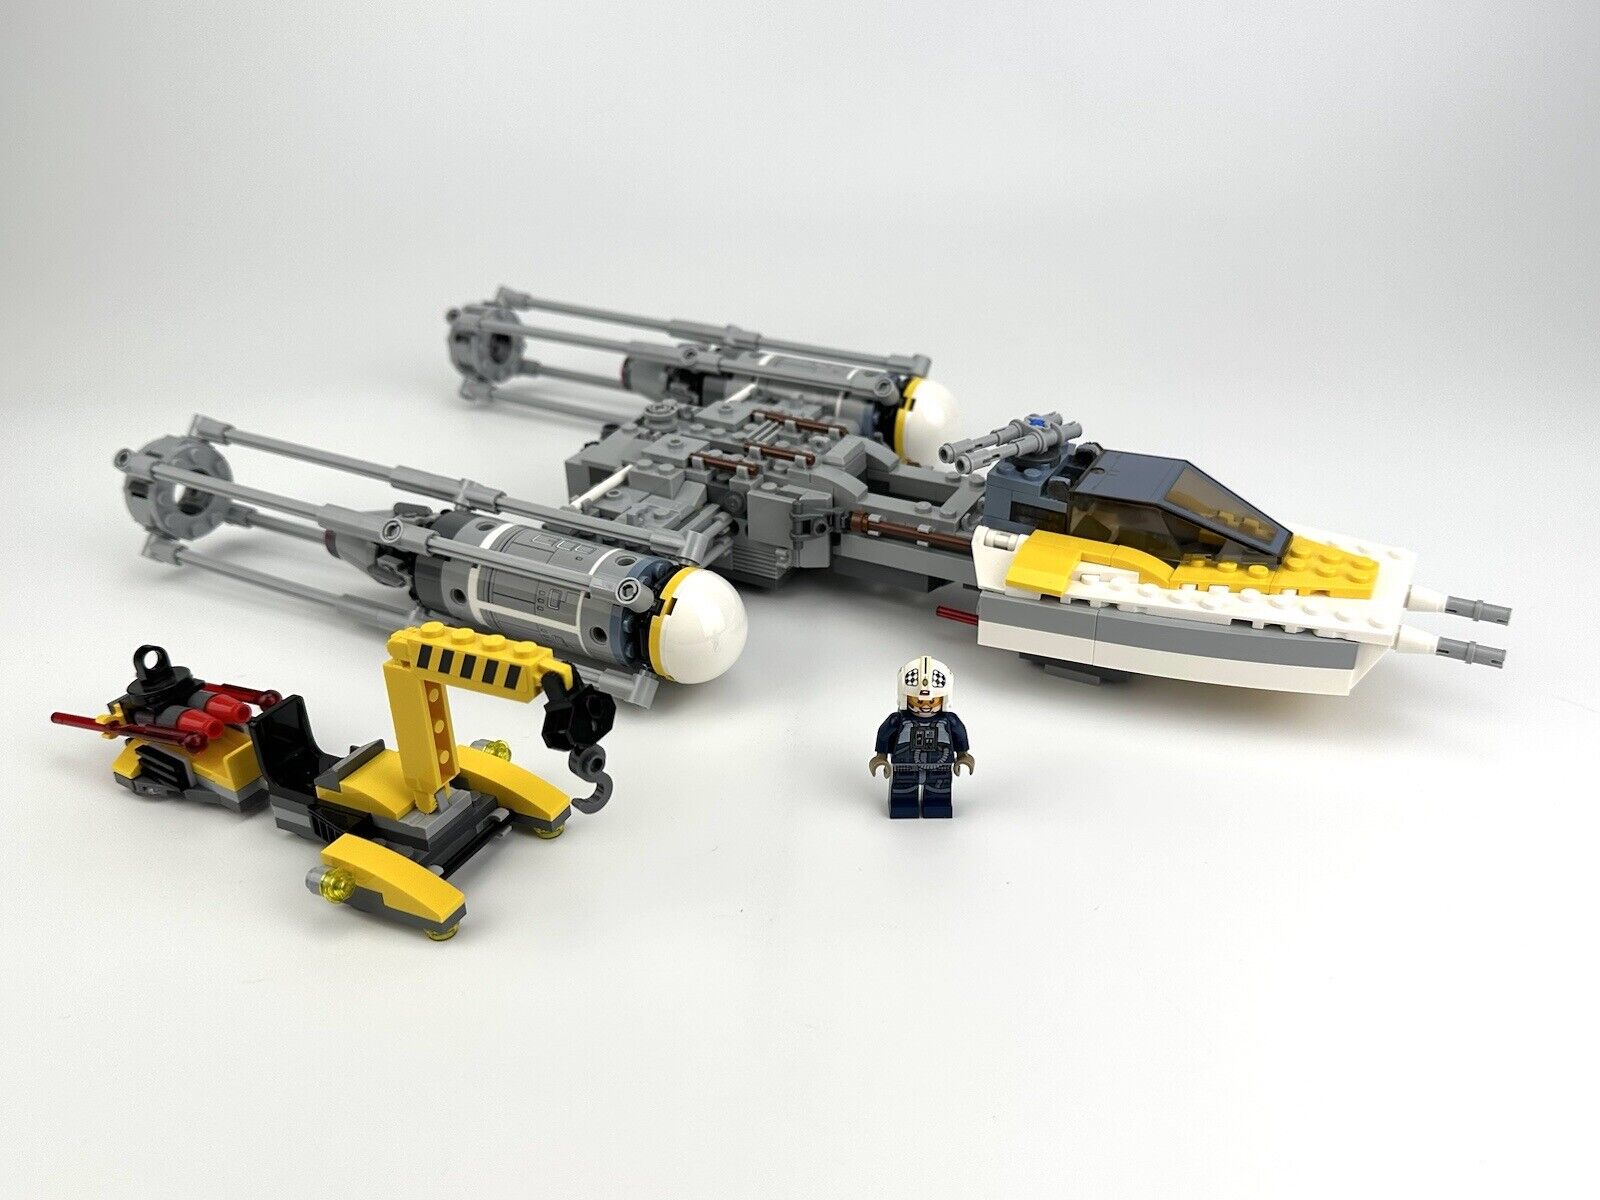 LEGO 75172 - Star Wars: Y-wing Starfighter - MISSING 4 FIGS